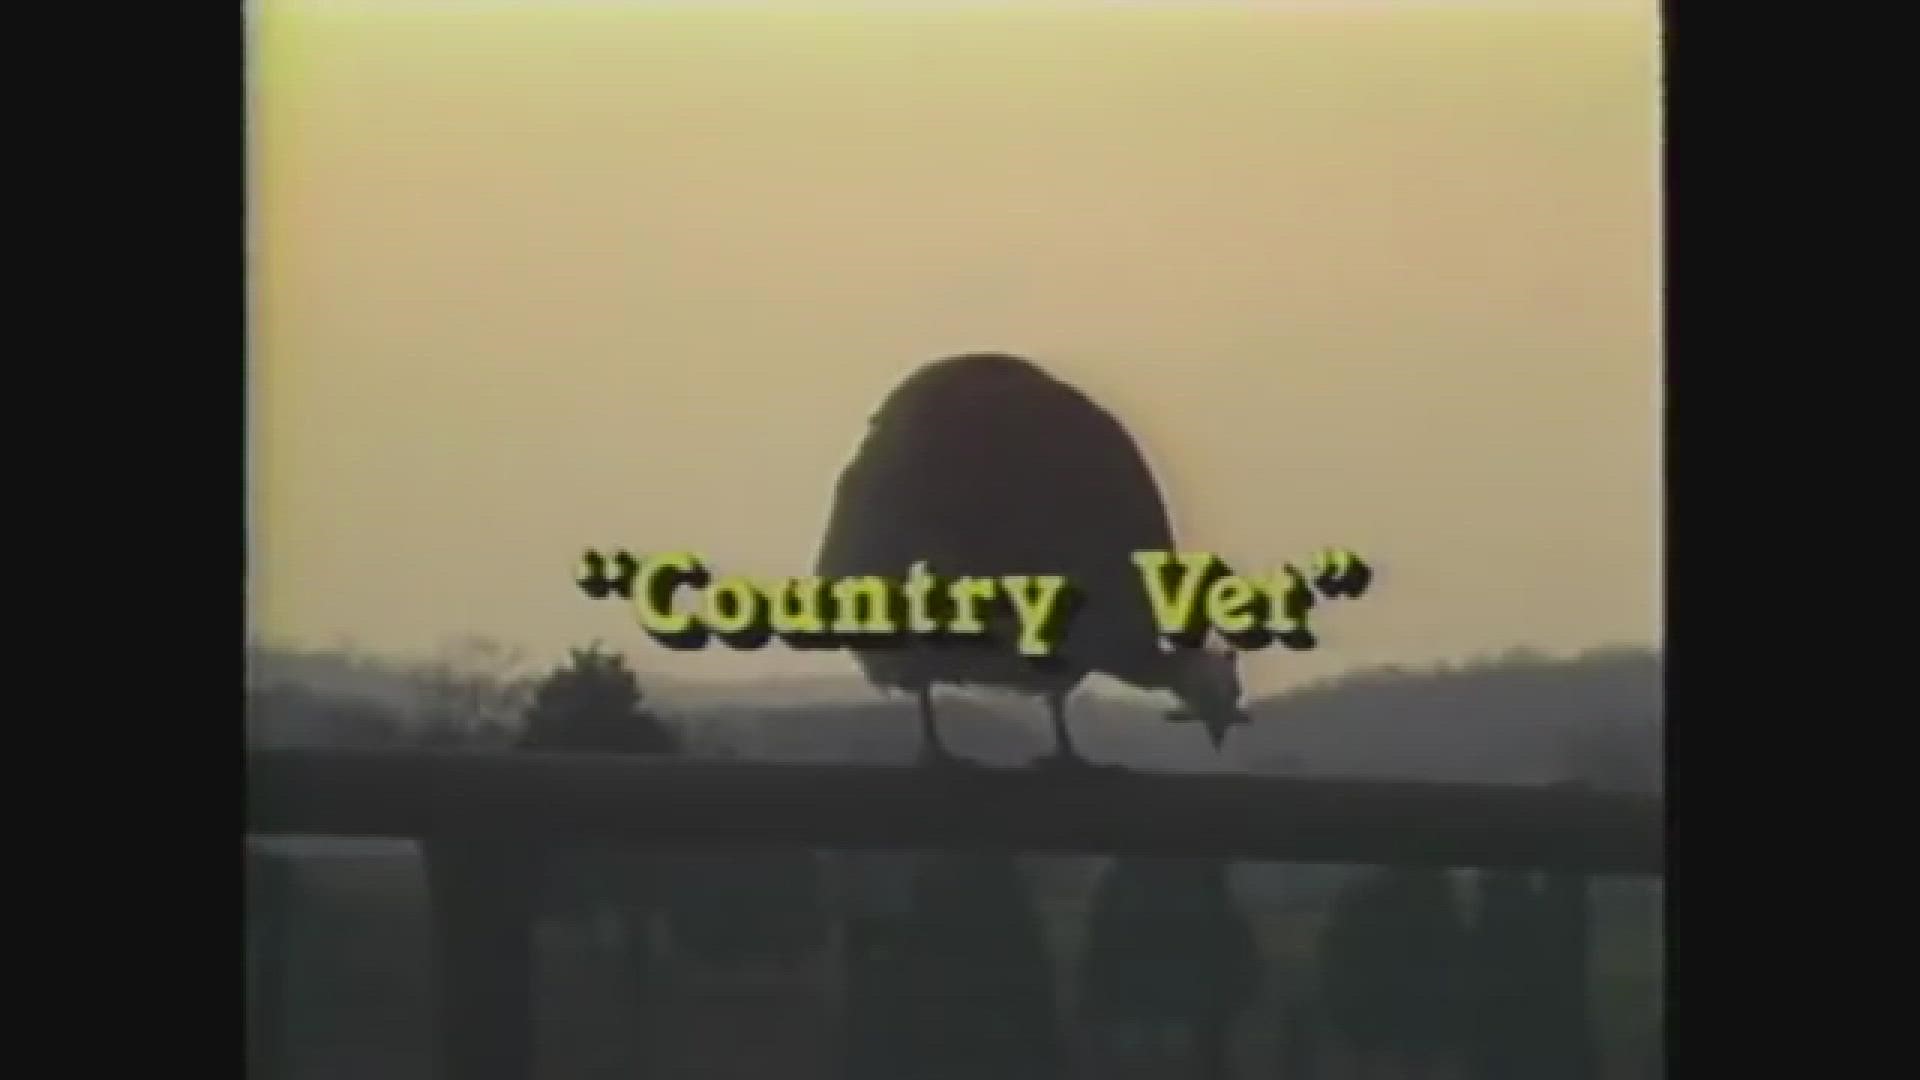 WBIR Channel 10's 'The Heartland Series' hosted by Bill Landry aired from 1984 to 2009. We hope you enjoy these captivating windows into East Tennessee history.